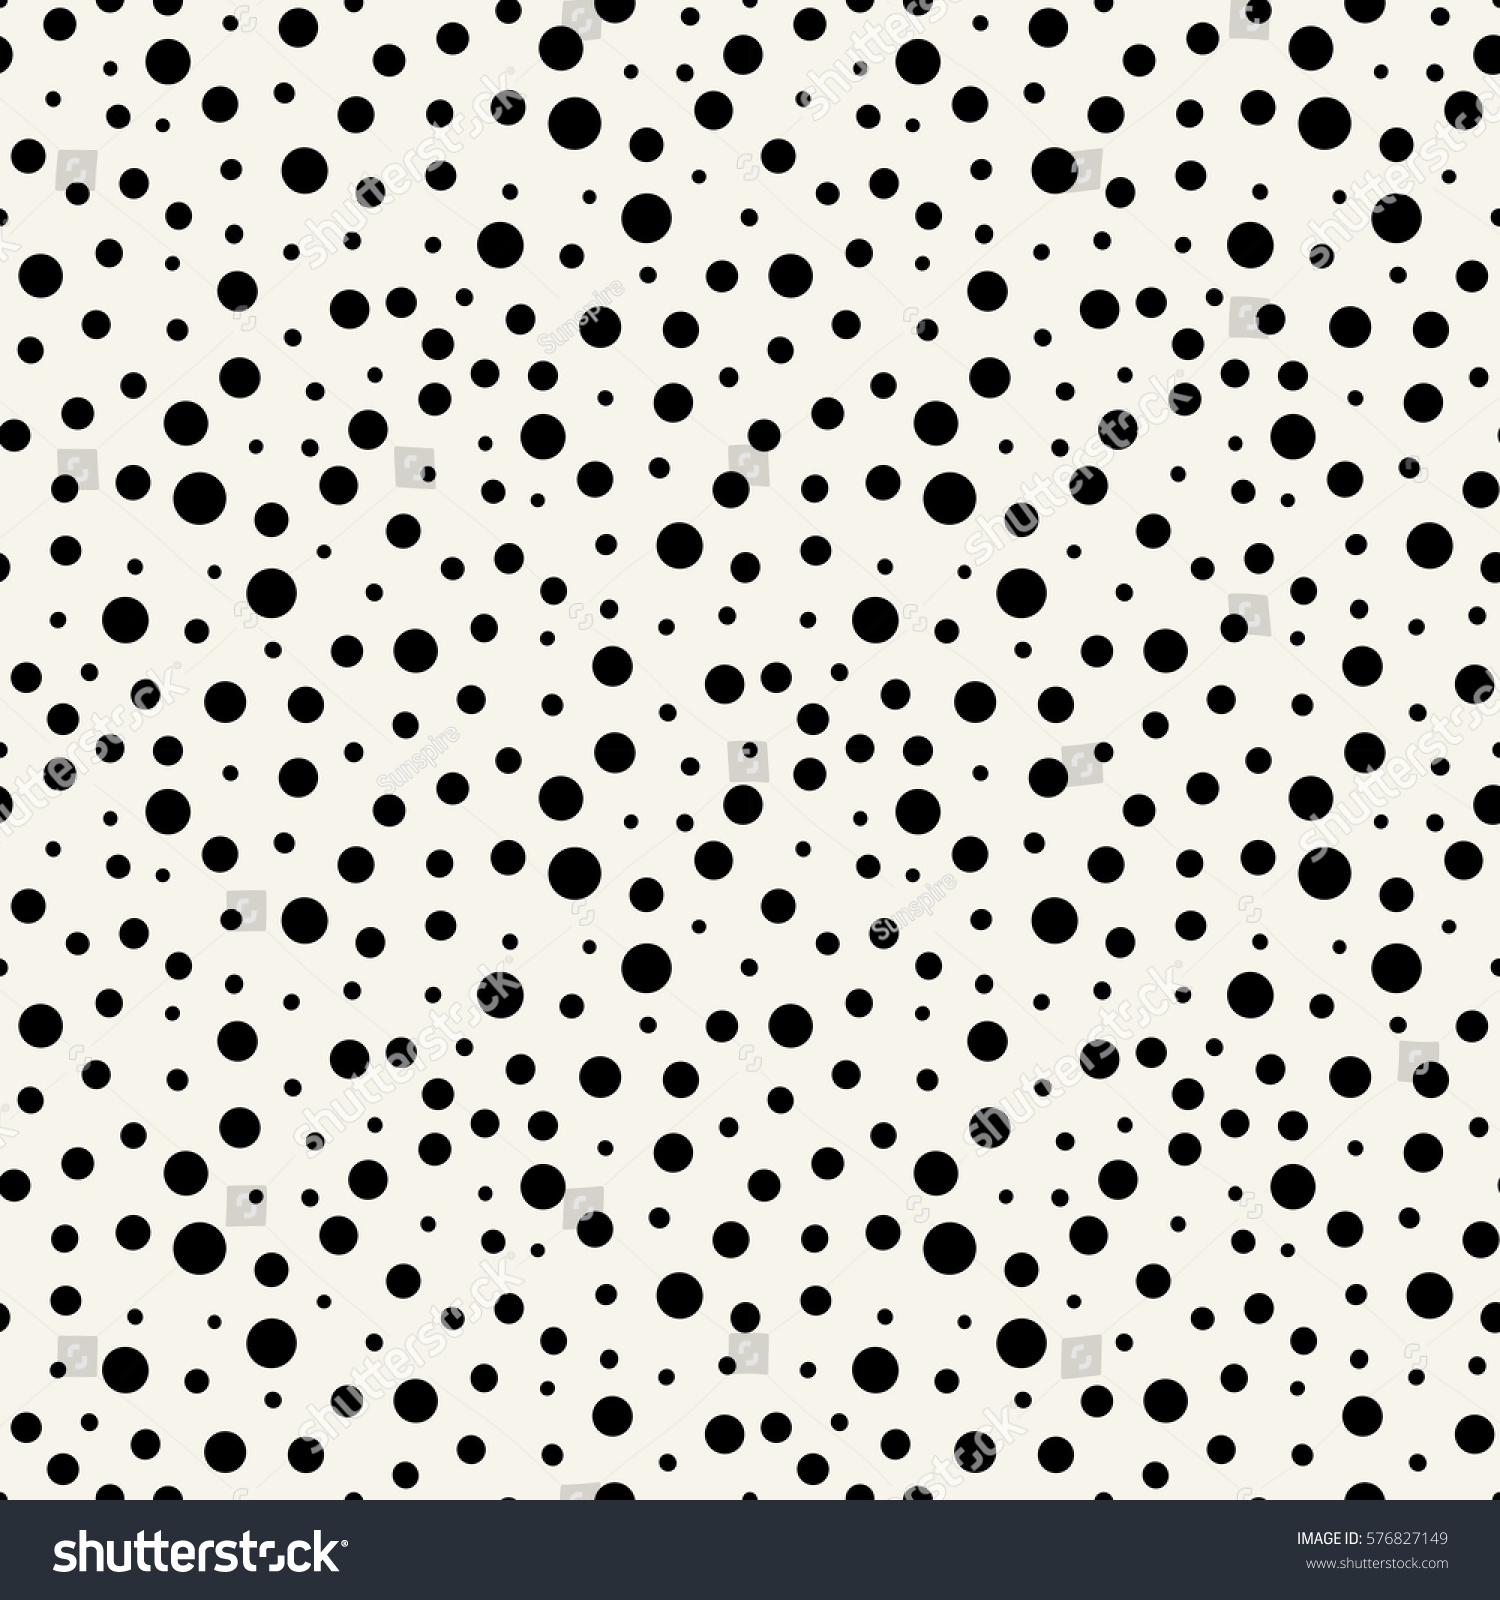 Abstract Geometric Black White Vector Dots Stock Vector (Royalty Free ...